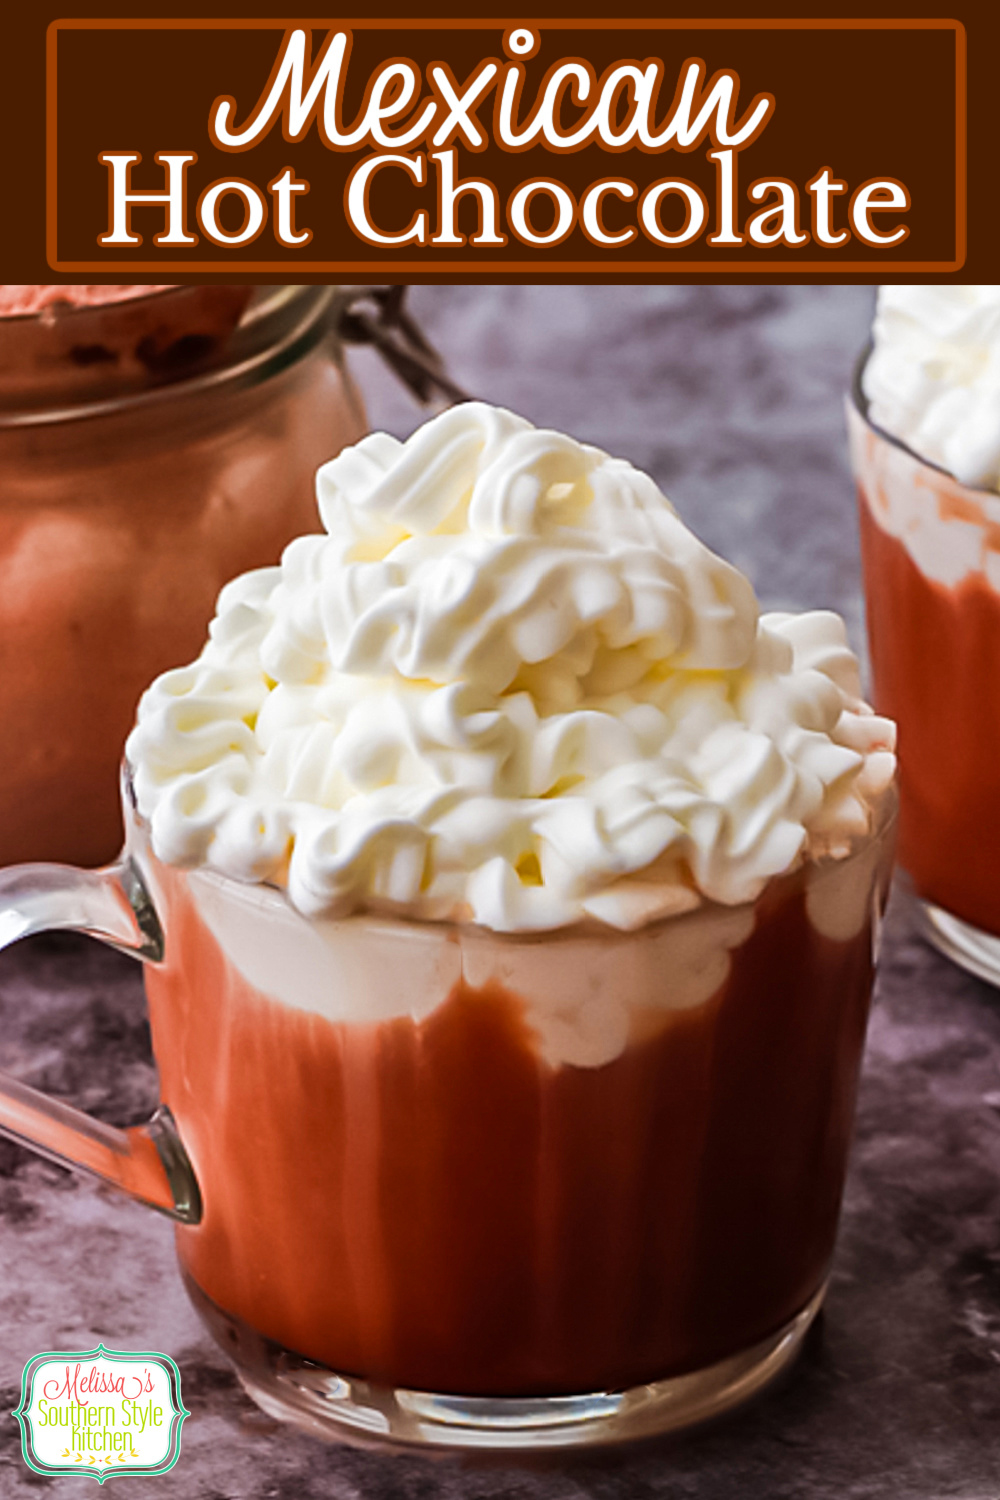 Treat the family to a steamy cup of Mexican Hot Chocolate! #hotcocoa #hotchocolate #mexicanhotchocolate #hotchocolaterecipes #hotchocolatemix via @melissasssk